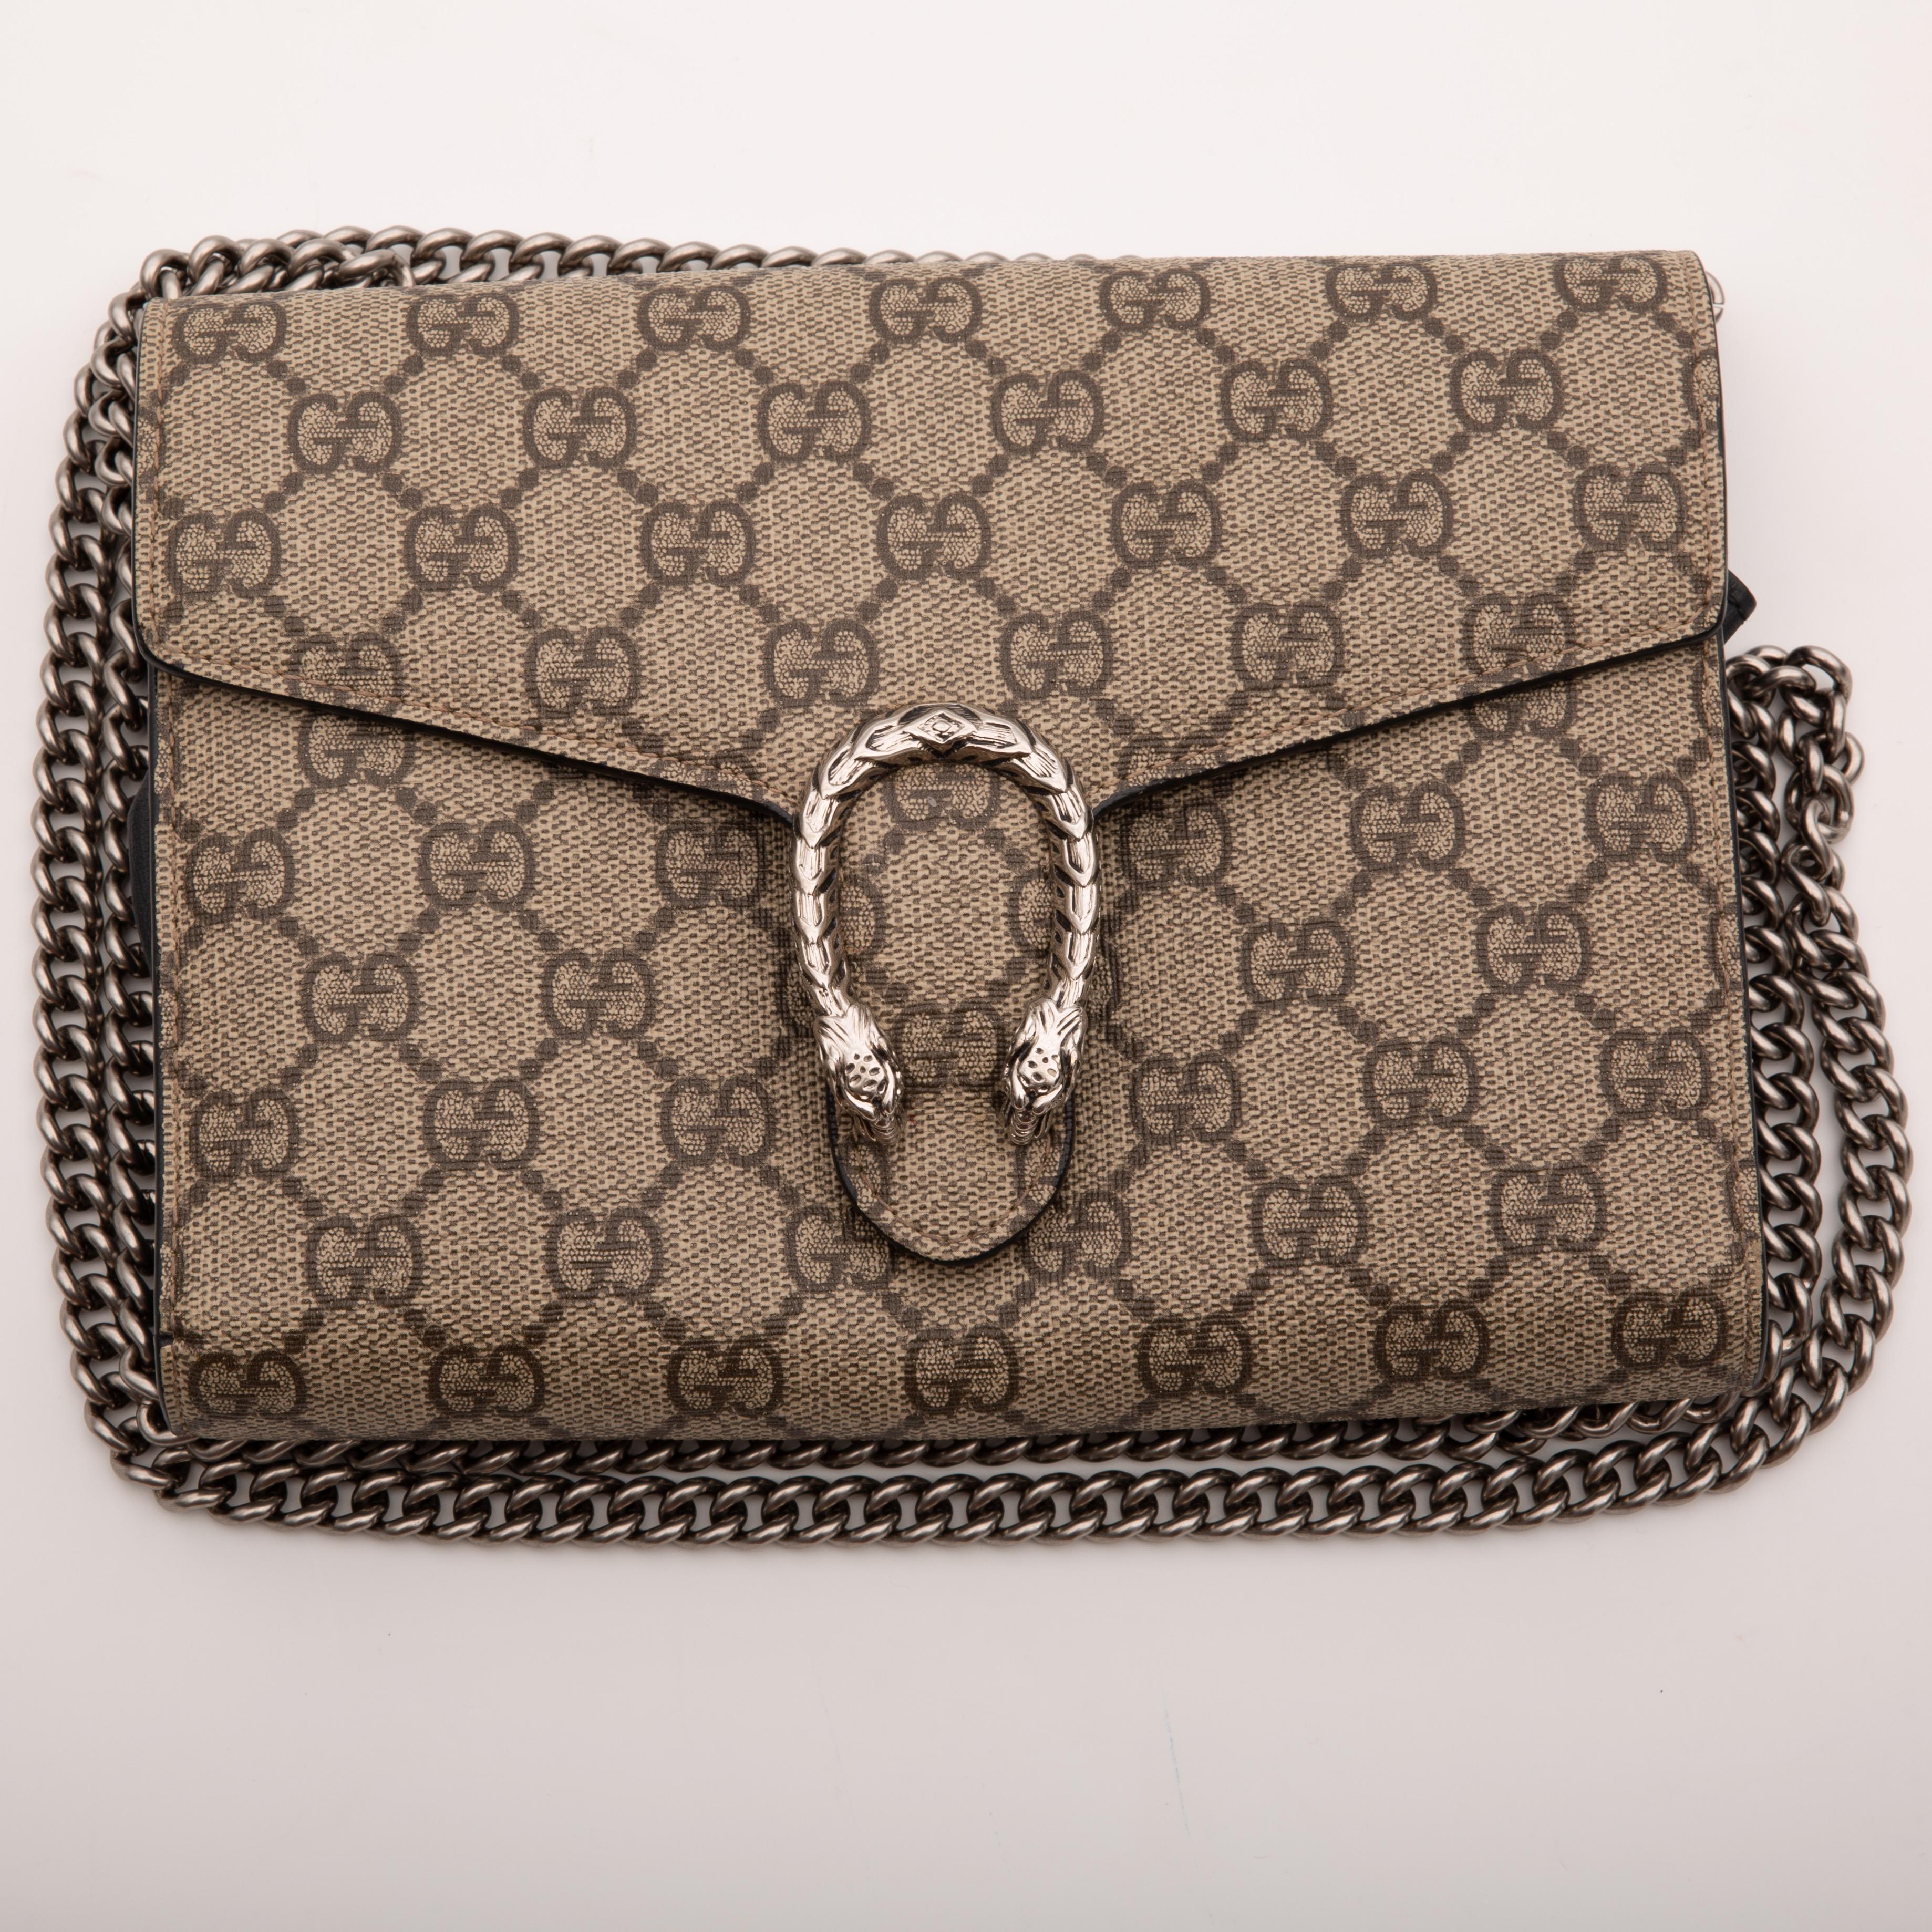 Women's or Men's Gucci Dionysus GG Supreme Wallet on a Chain Bag (401231) For Sale